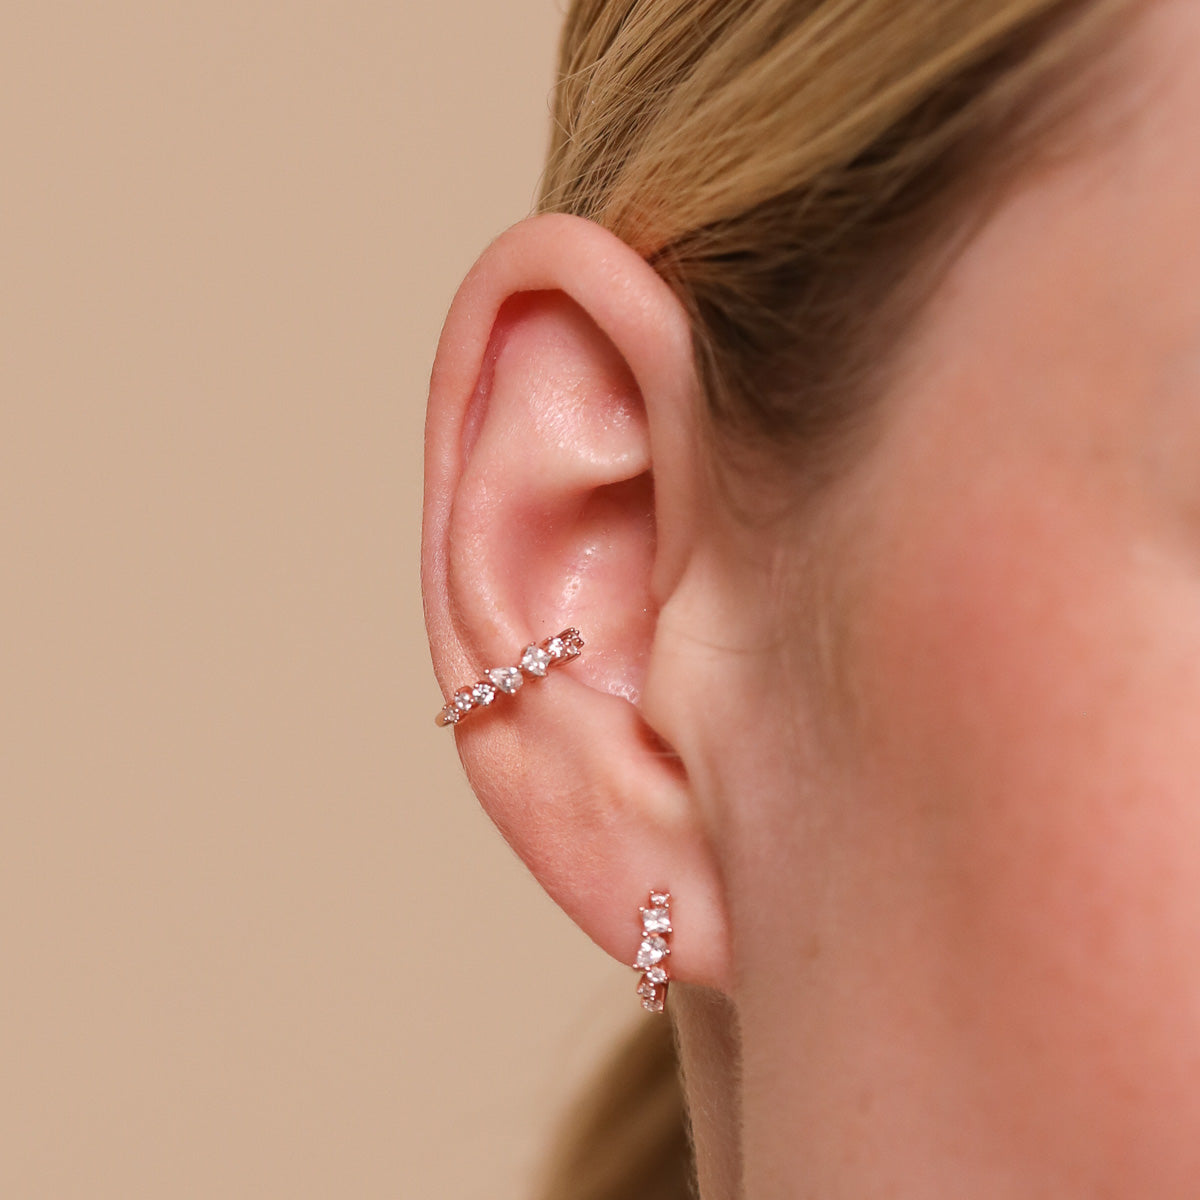 The Best Places to Buy Ear Cuffs in 2023: ASOS, Nordstrom, and More